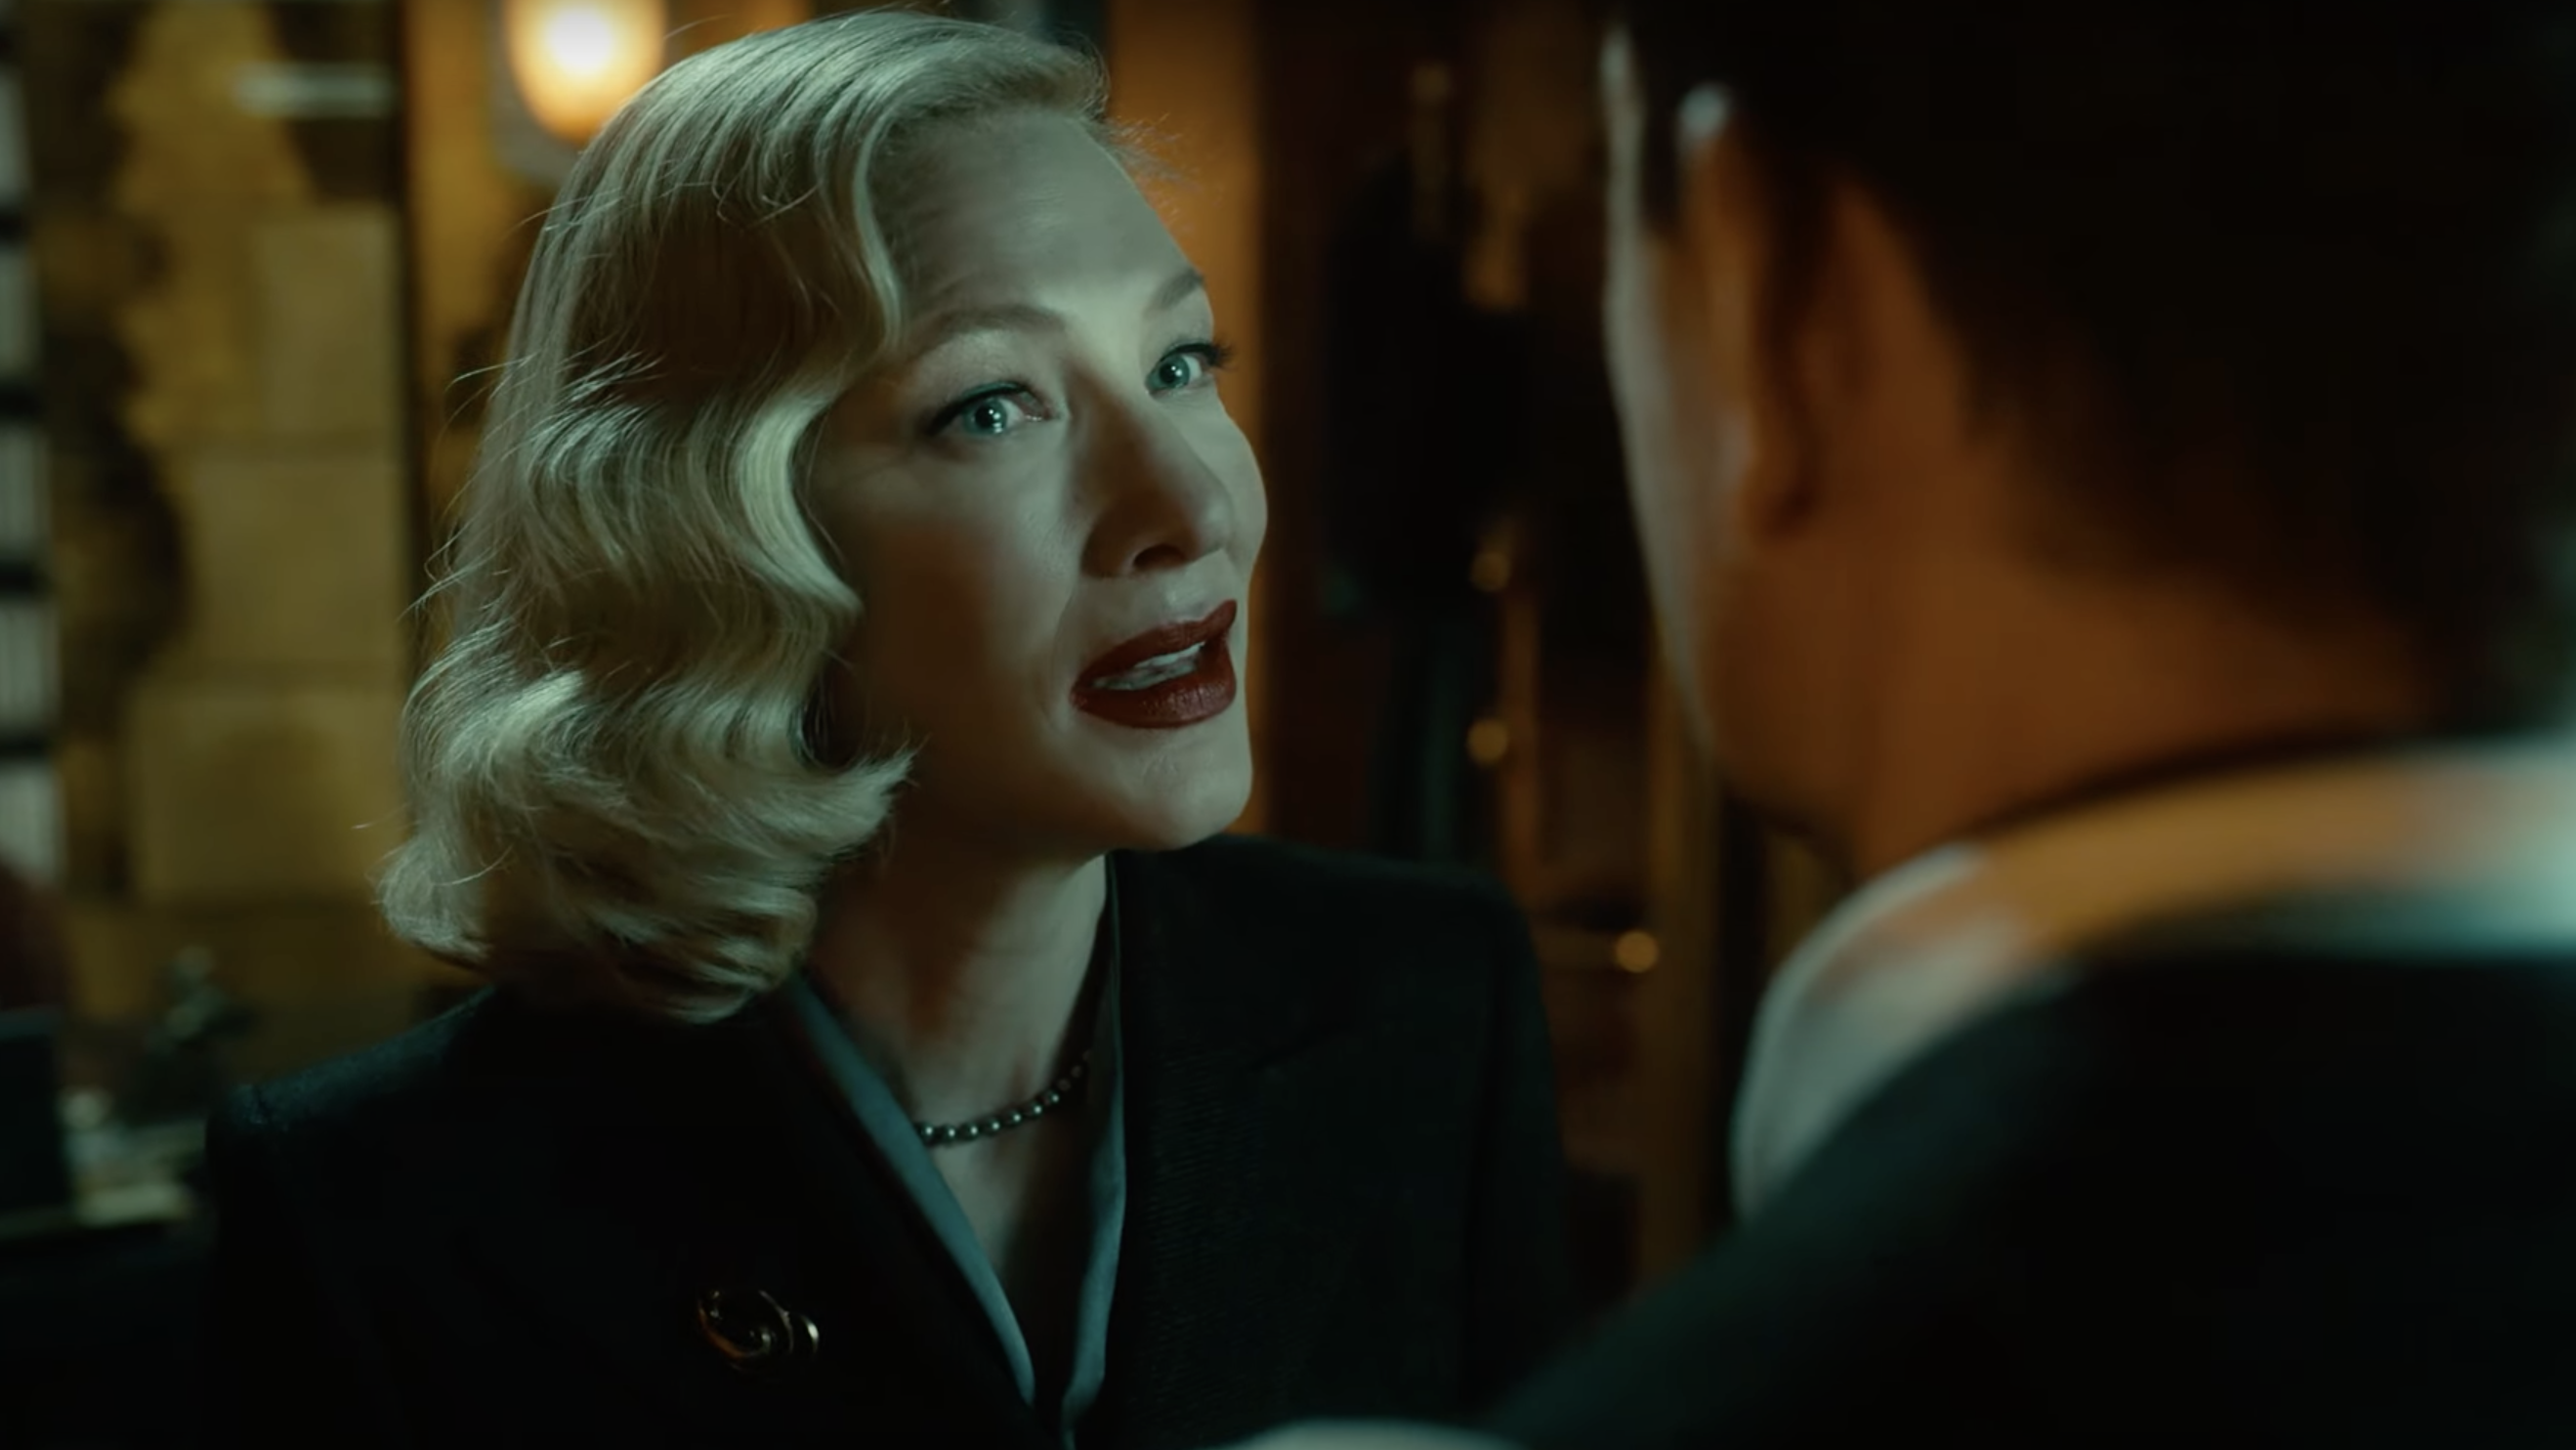 Bradley Cooper and Cate Blanchett hatch up a con job in trailer for Guillermo Del Toro’s Nightmare Alley